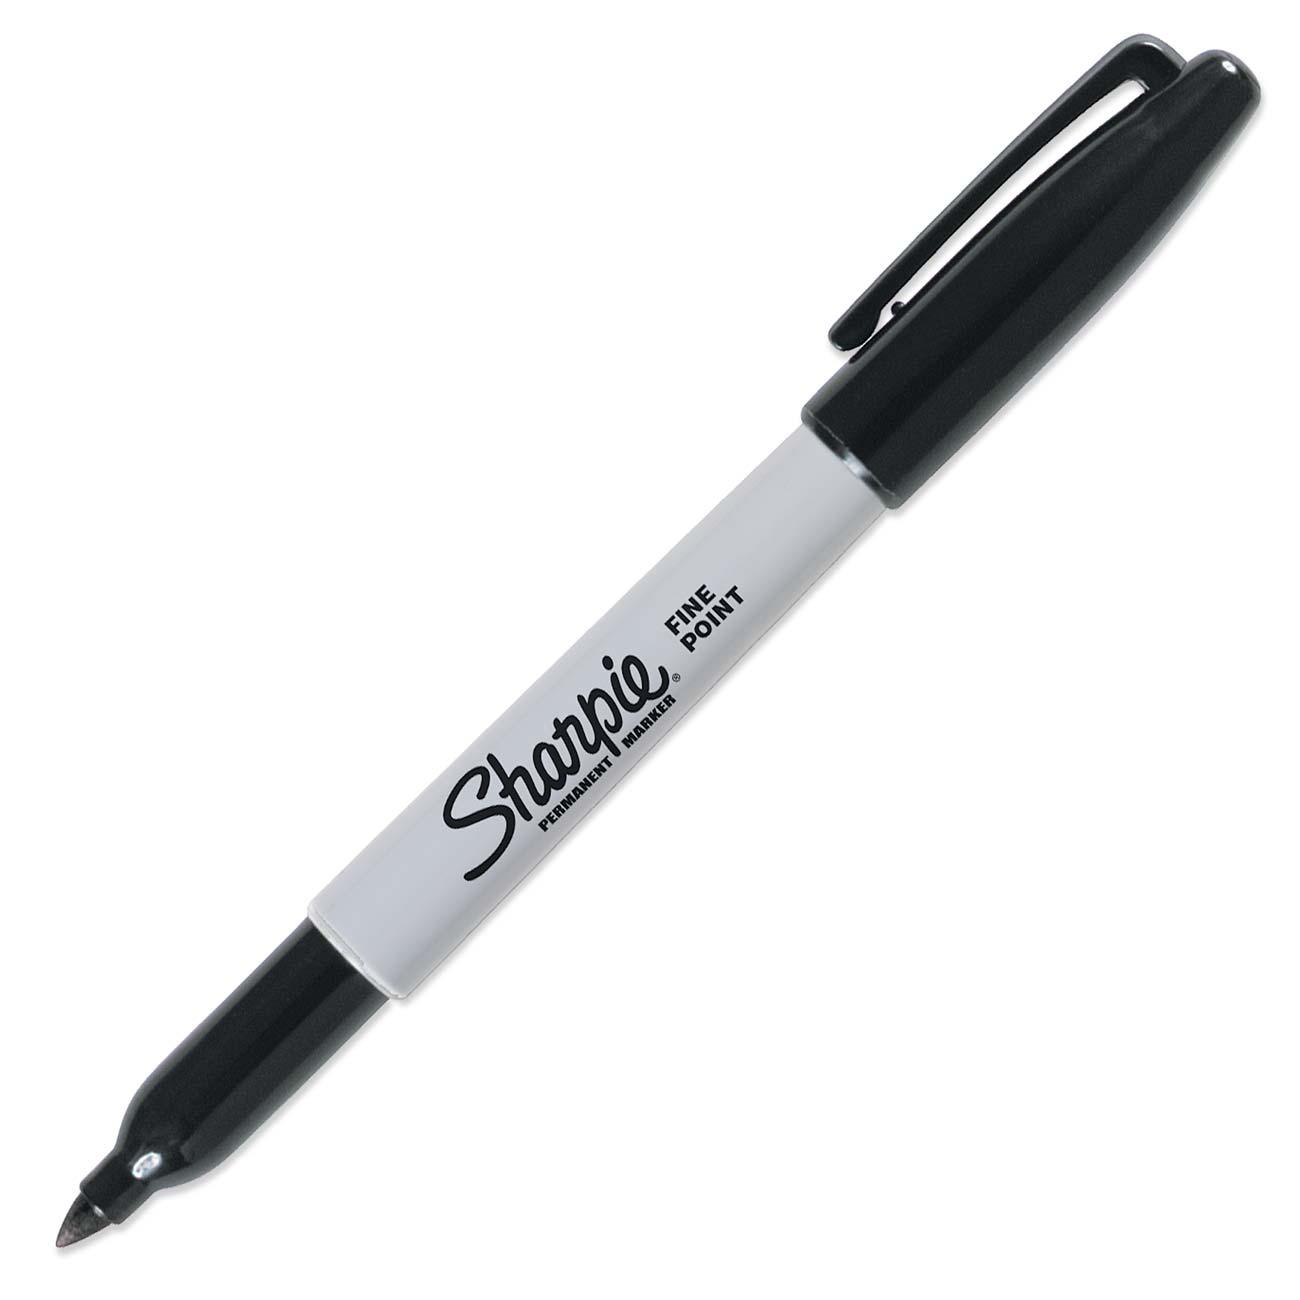 High Quality Sharpie, for the crazy old coot in your life Blank Meme Template